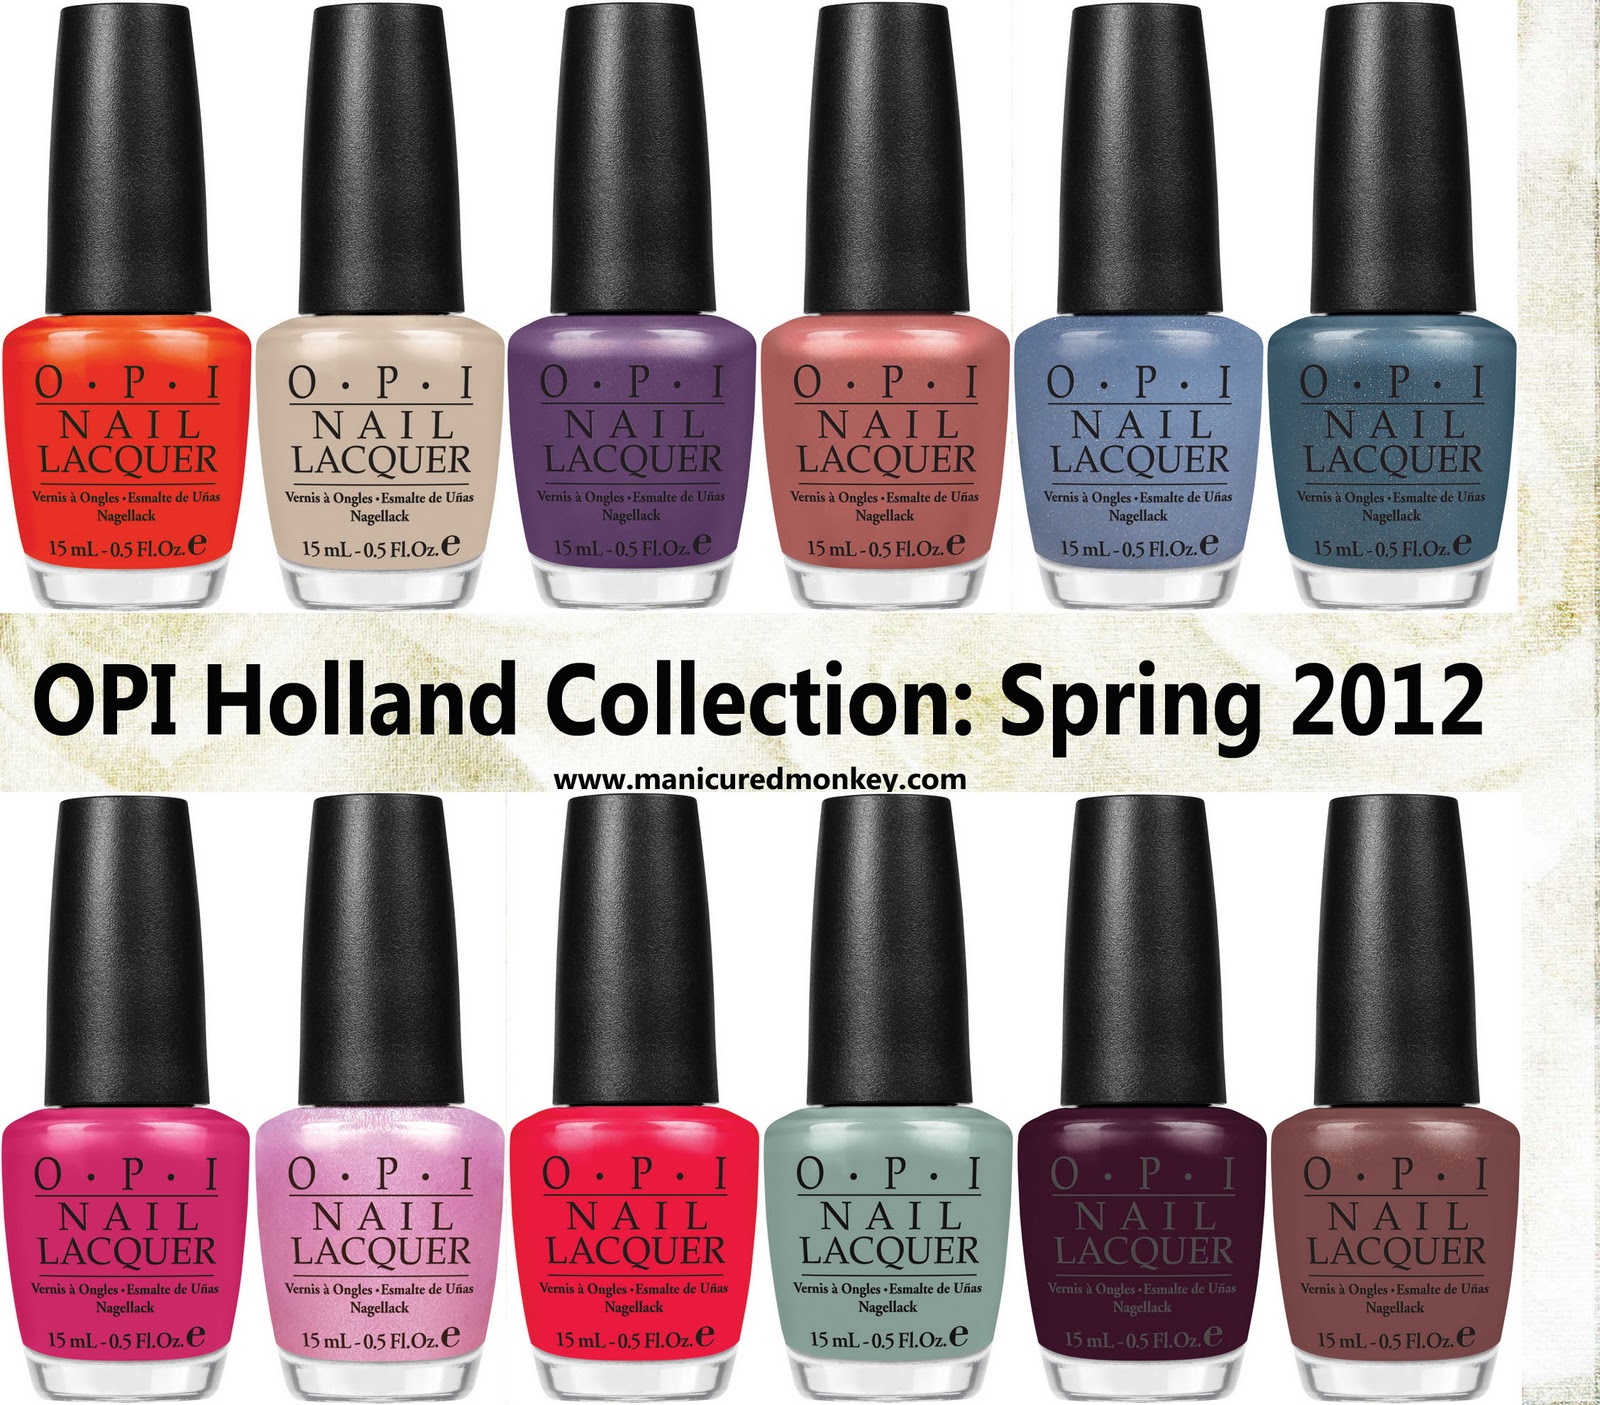 The Manicured Monkey: OPI: Holland Collection (spring 2012) press release